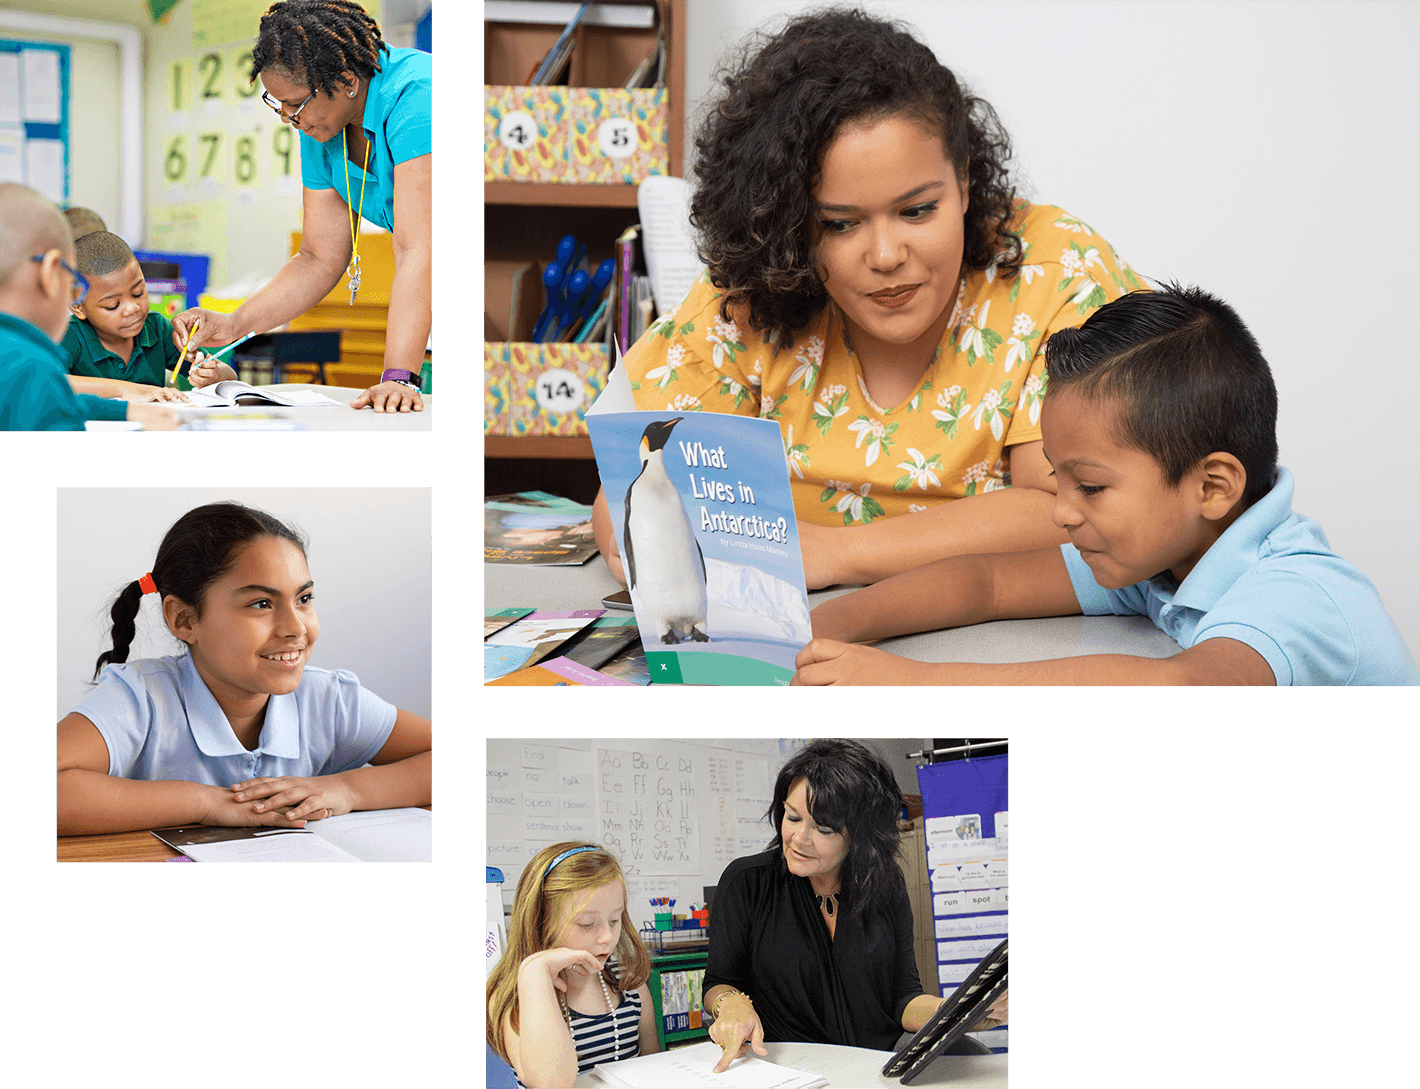 A collage of three images showing diverse teachers, funded by stimulus funding for schools, interacting with their young students in classroom settings.